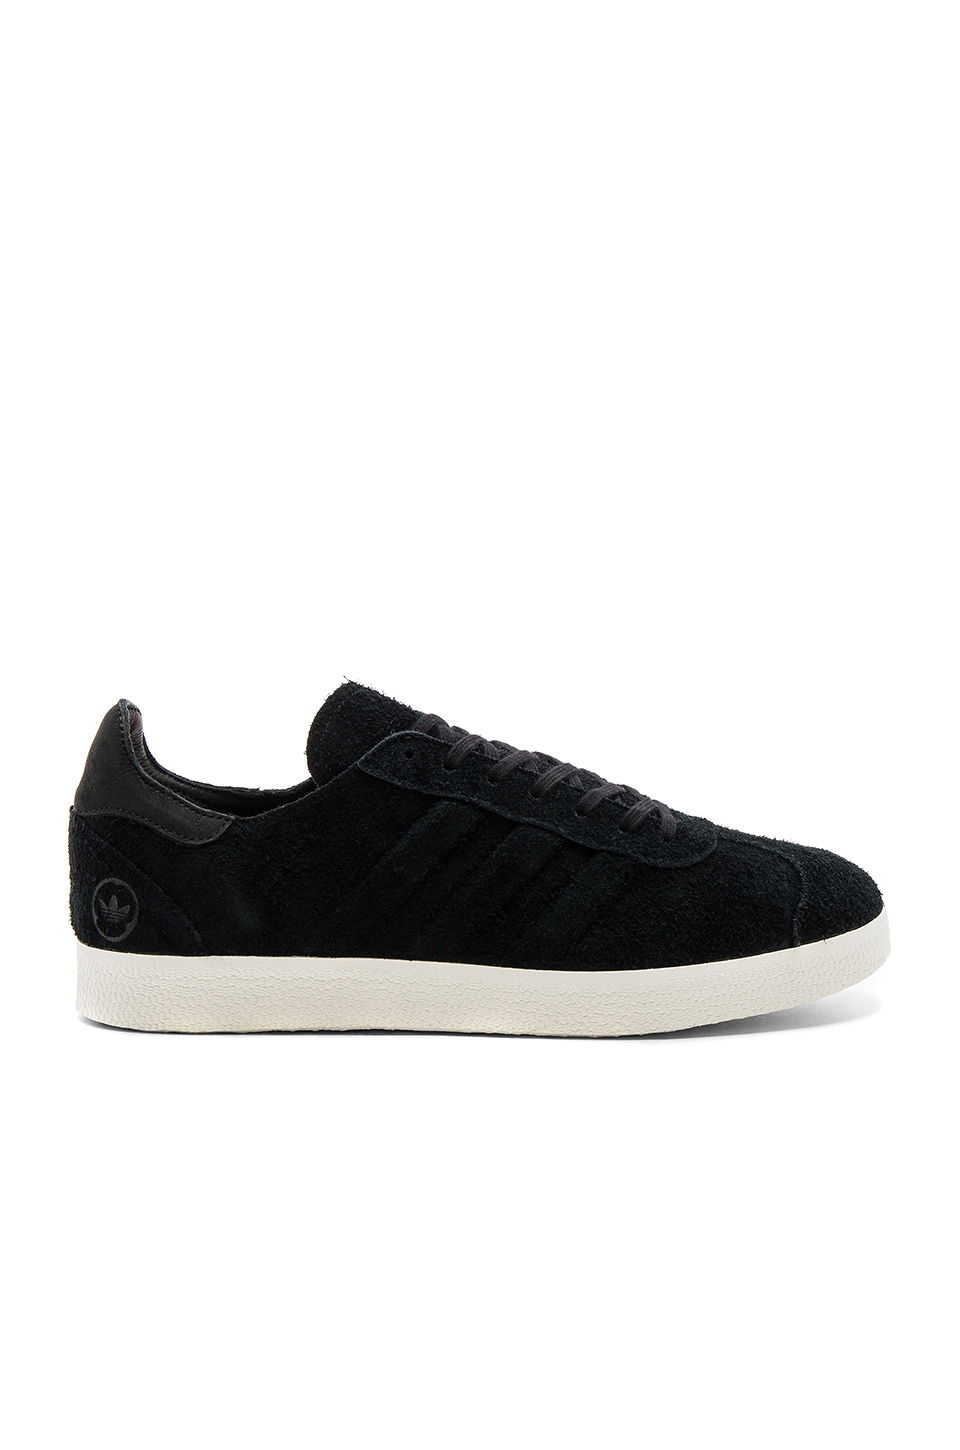 adidas by wings + horns WH GAZELLE 85 